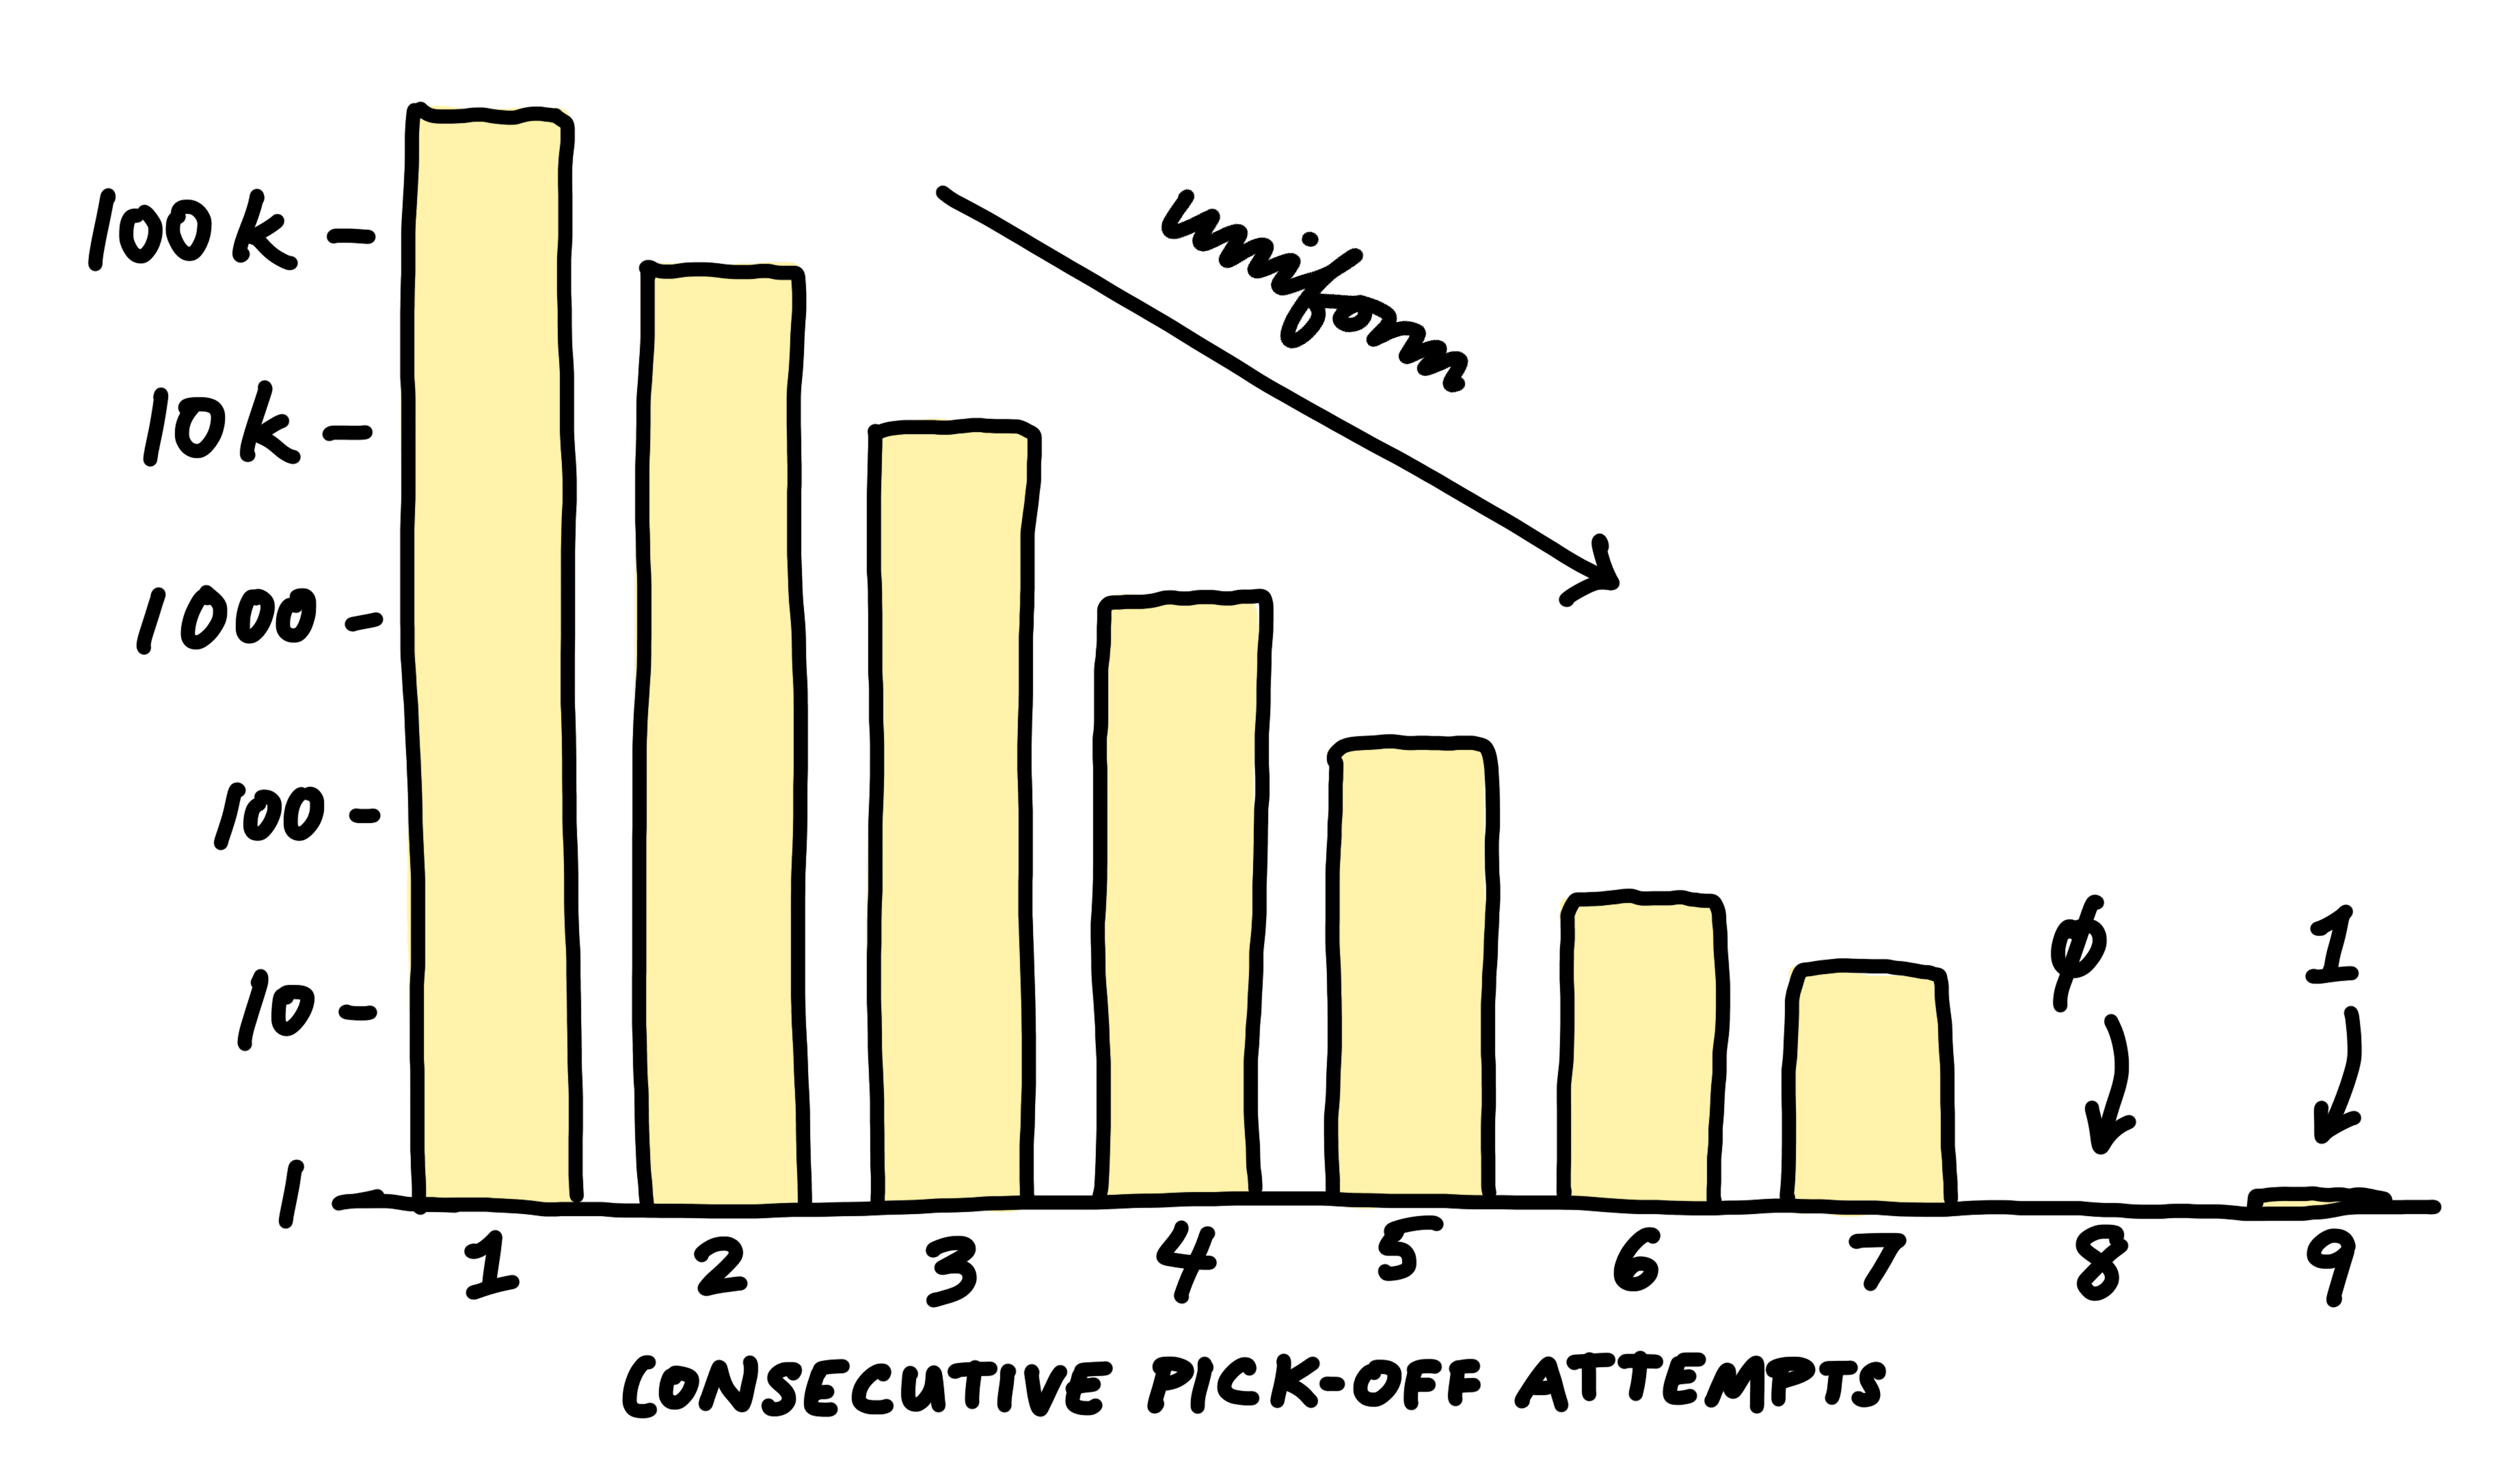 A bar chart showing the frequency of consecutive pick-off attempts